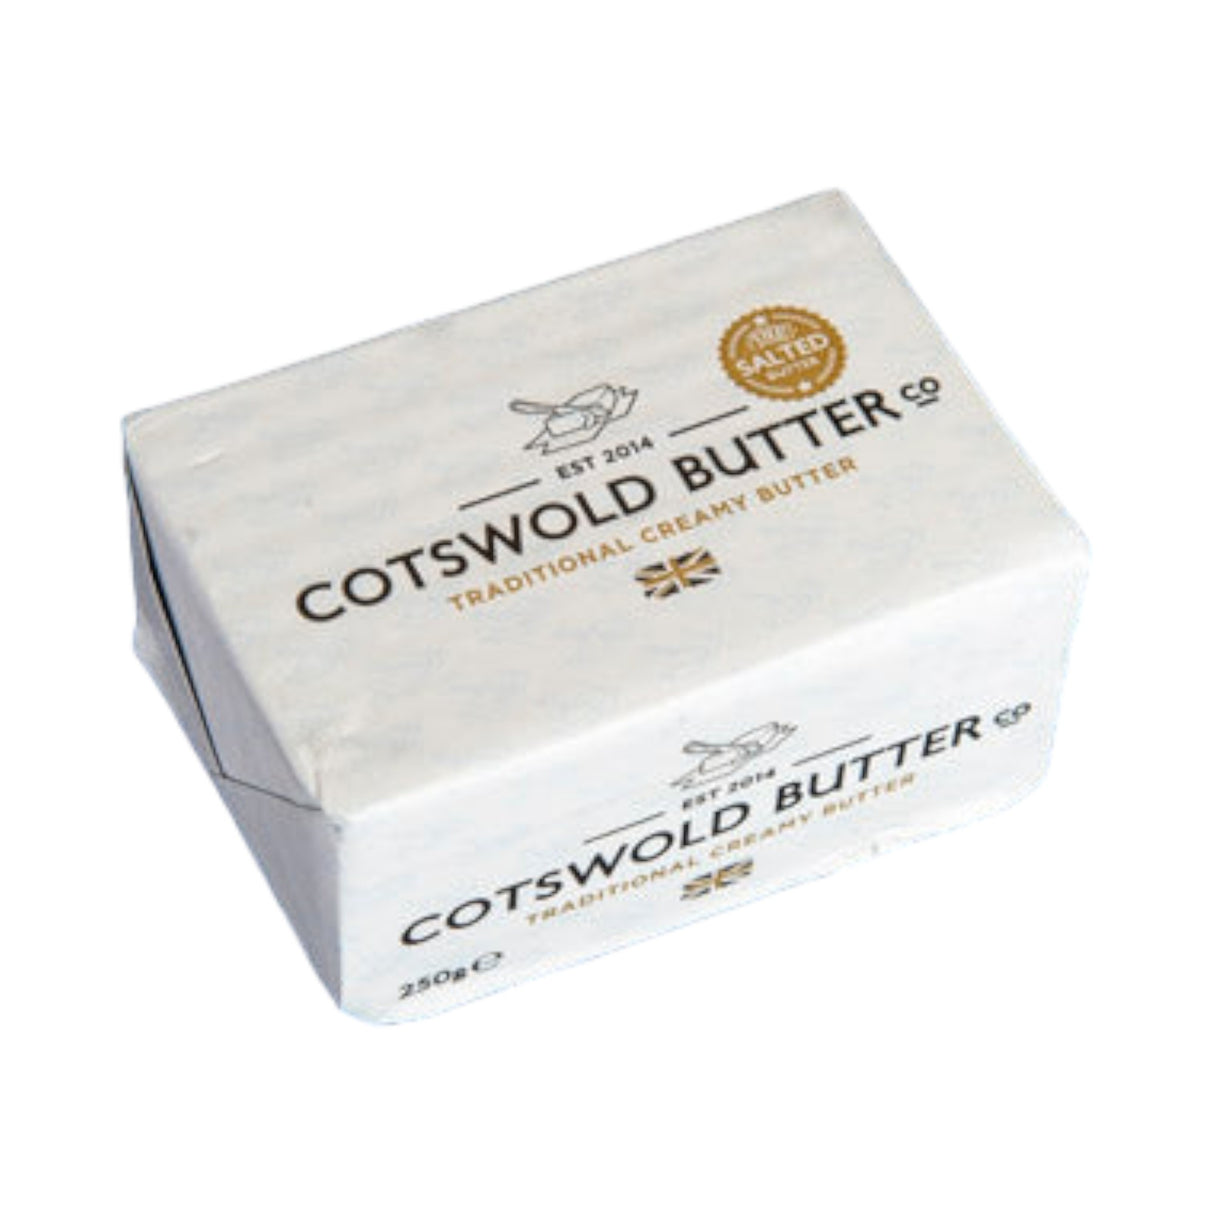 Cotswold Butter